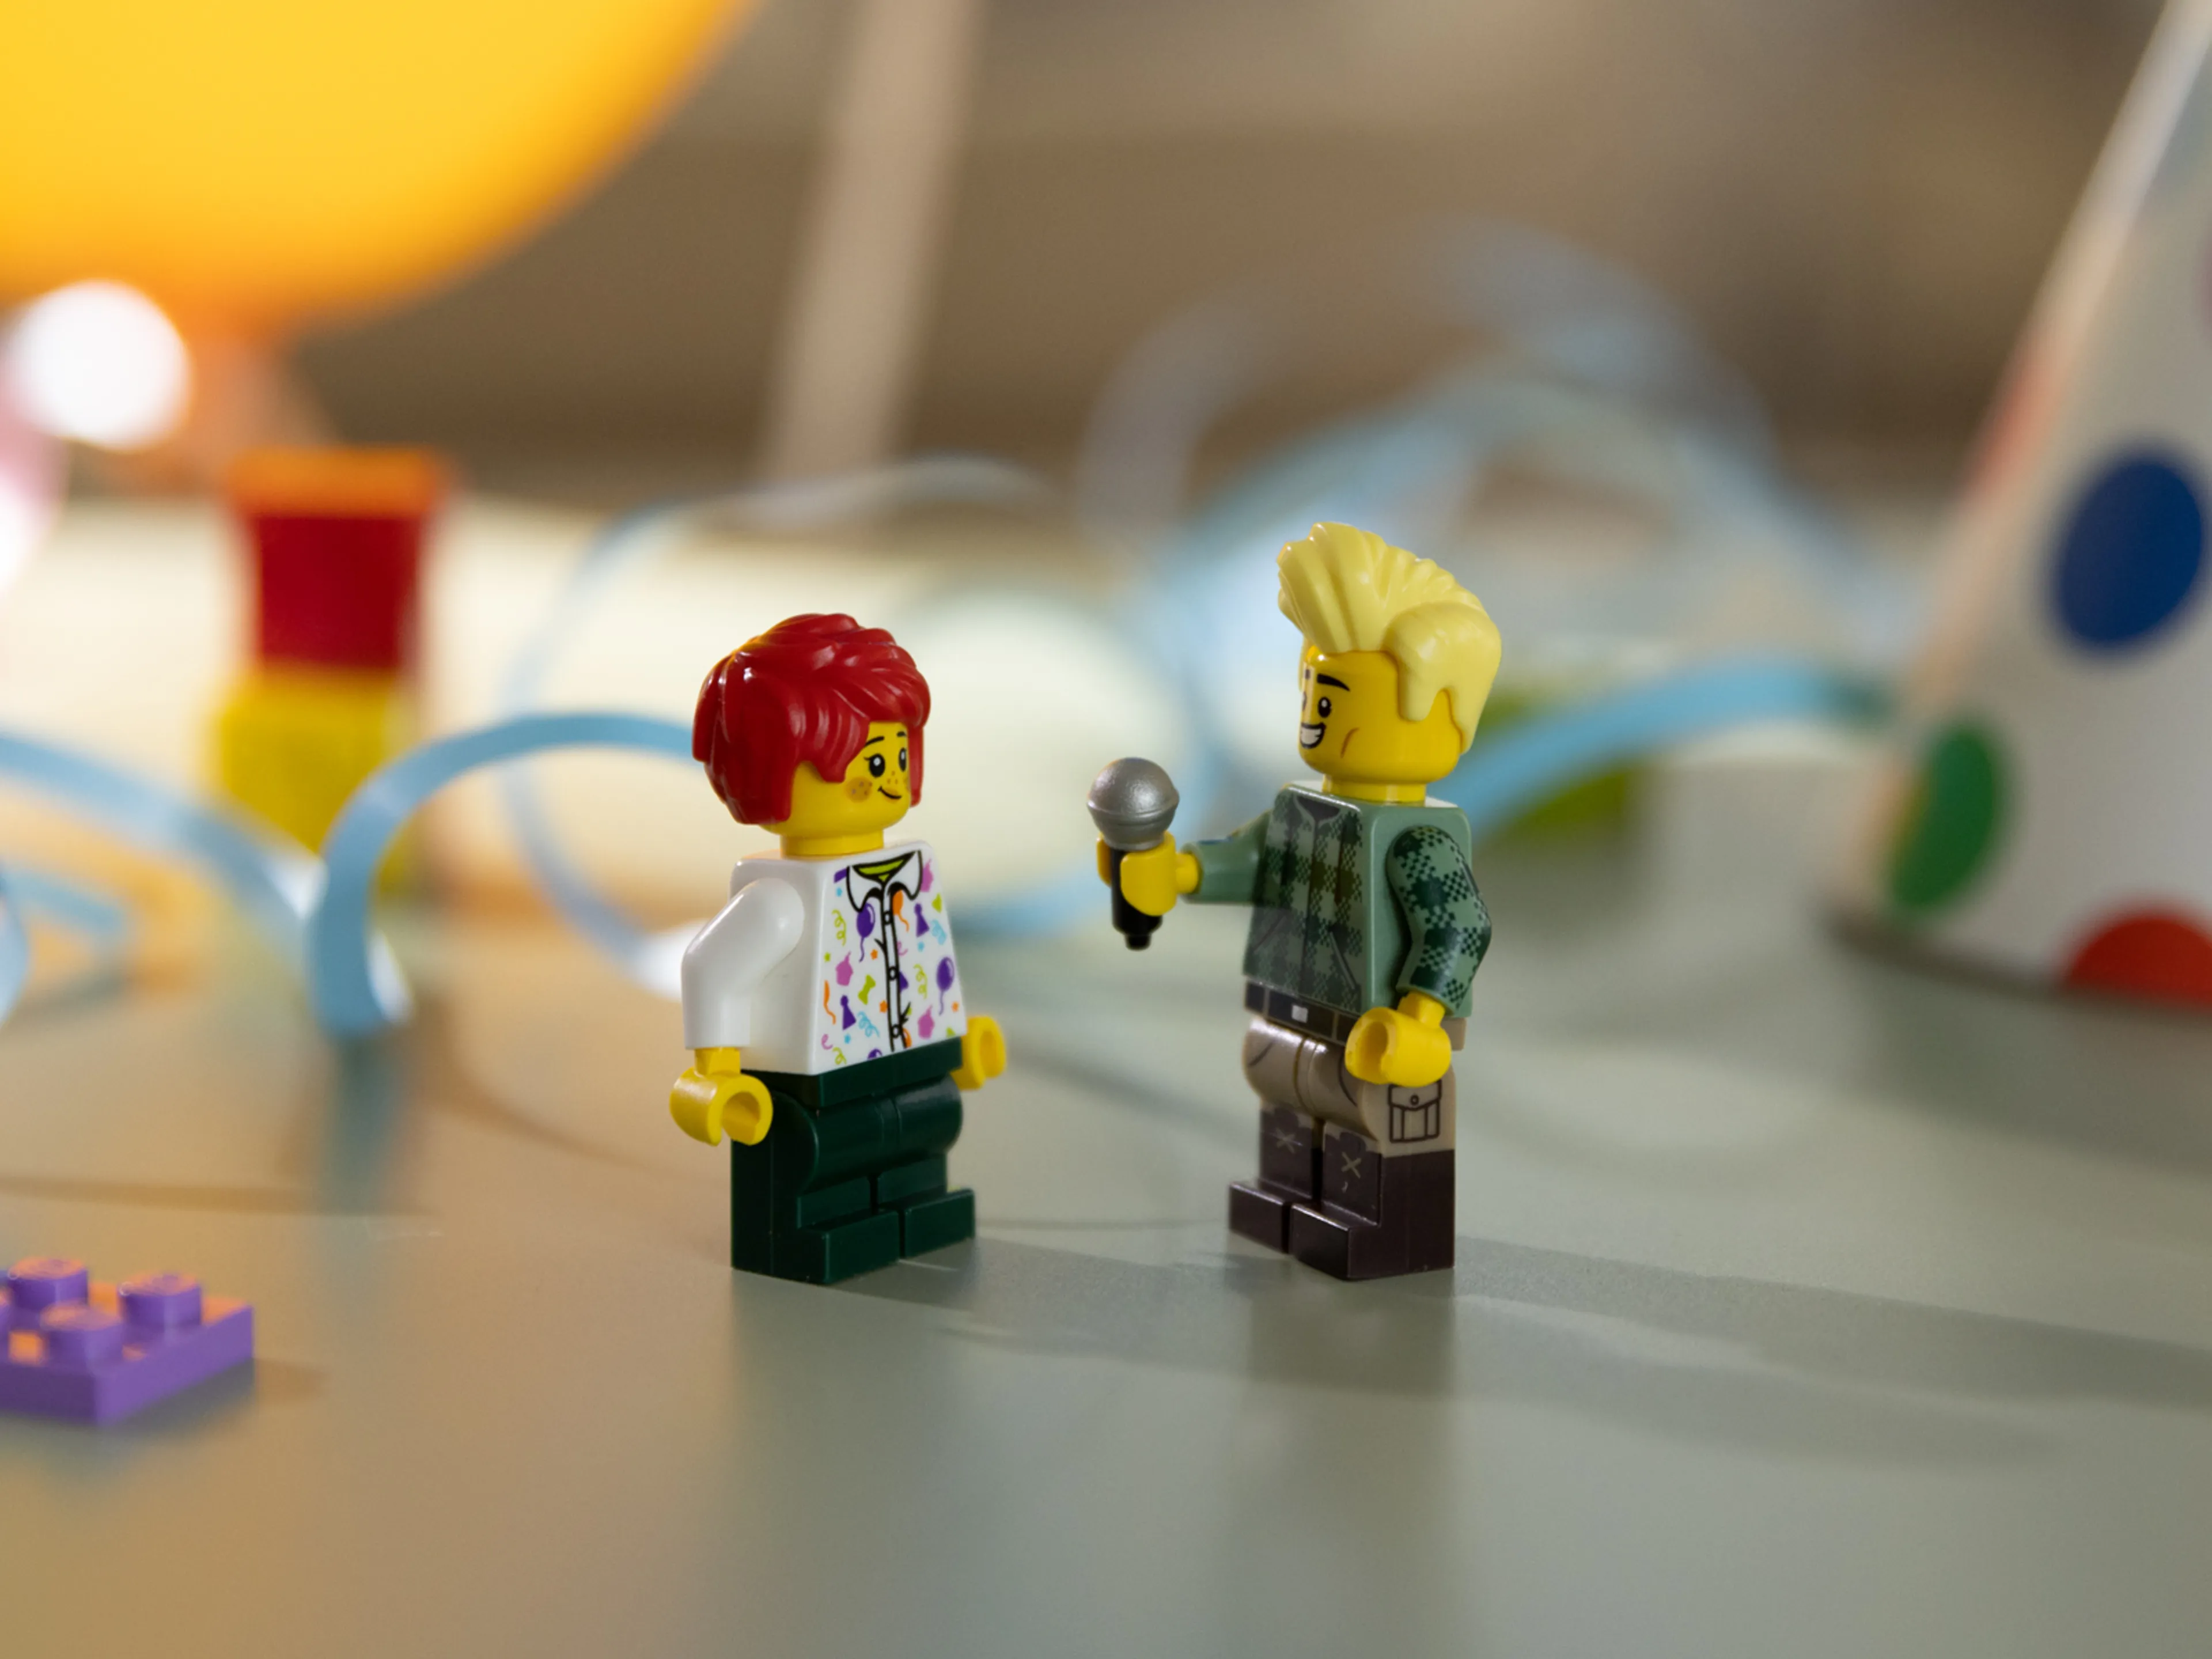 Two LEGO Mini-figures. One holding a LEGO microphone